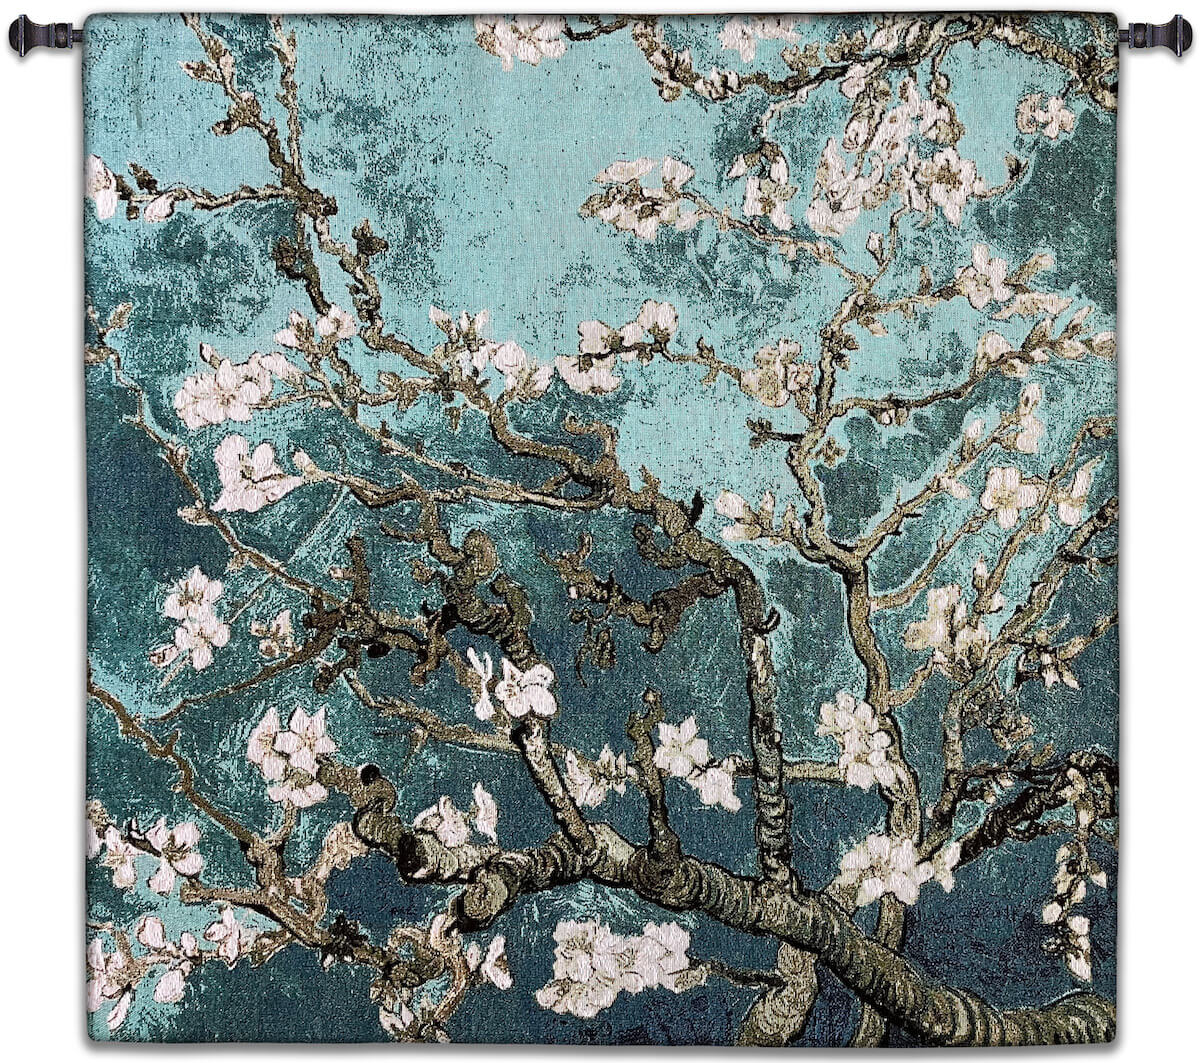 Almond Blossom Teal Square Wall Tapestry Abstract, Almond, Art, S, Blossom, Teal, Turquoise, Botanical, Carolina, USAwoven, Cotton, Floral, Flower, Flowers, Gogh, Gray, Grey, Hanging, Oriental, Pedals, Purple, Seller, Square, Tapestries, Tapestry, Top50, Tree, Van, Wall, White, Woven, Woven, Bestseller, tapestries, tapestrys, hangings, and, the, exclusive